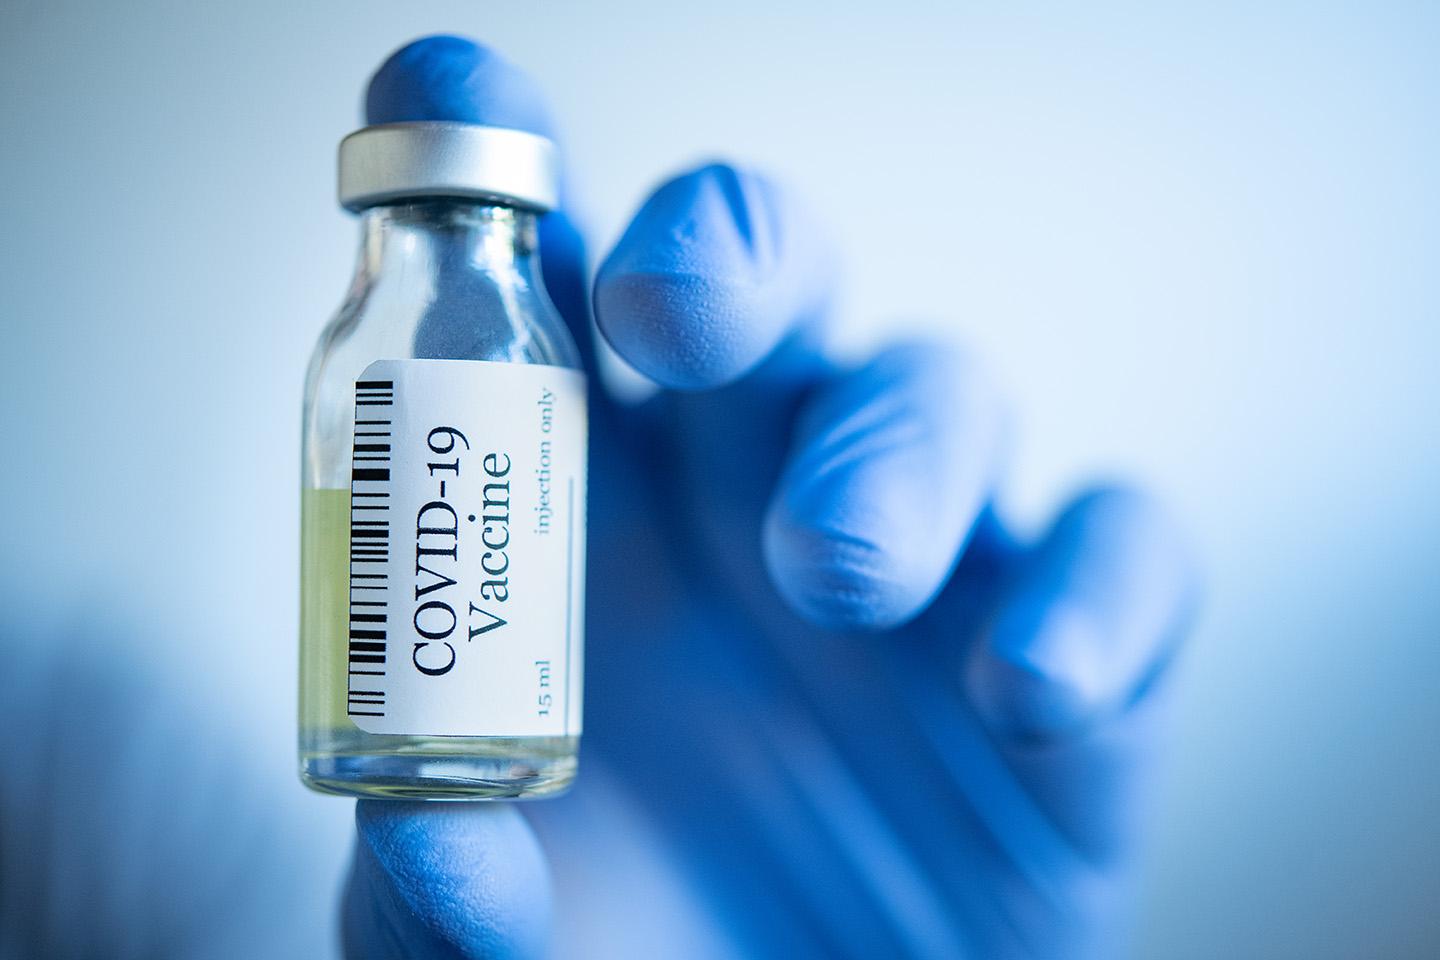 American Hospital Association Launches COVID-19 Vaccination Education Campaign